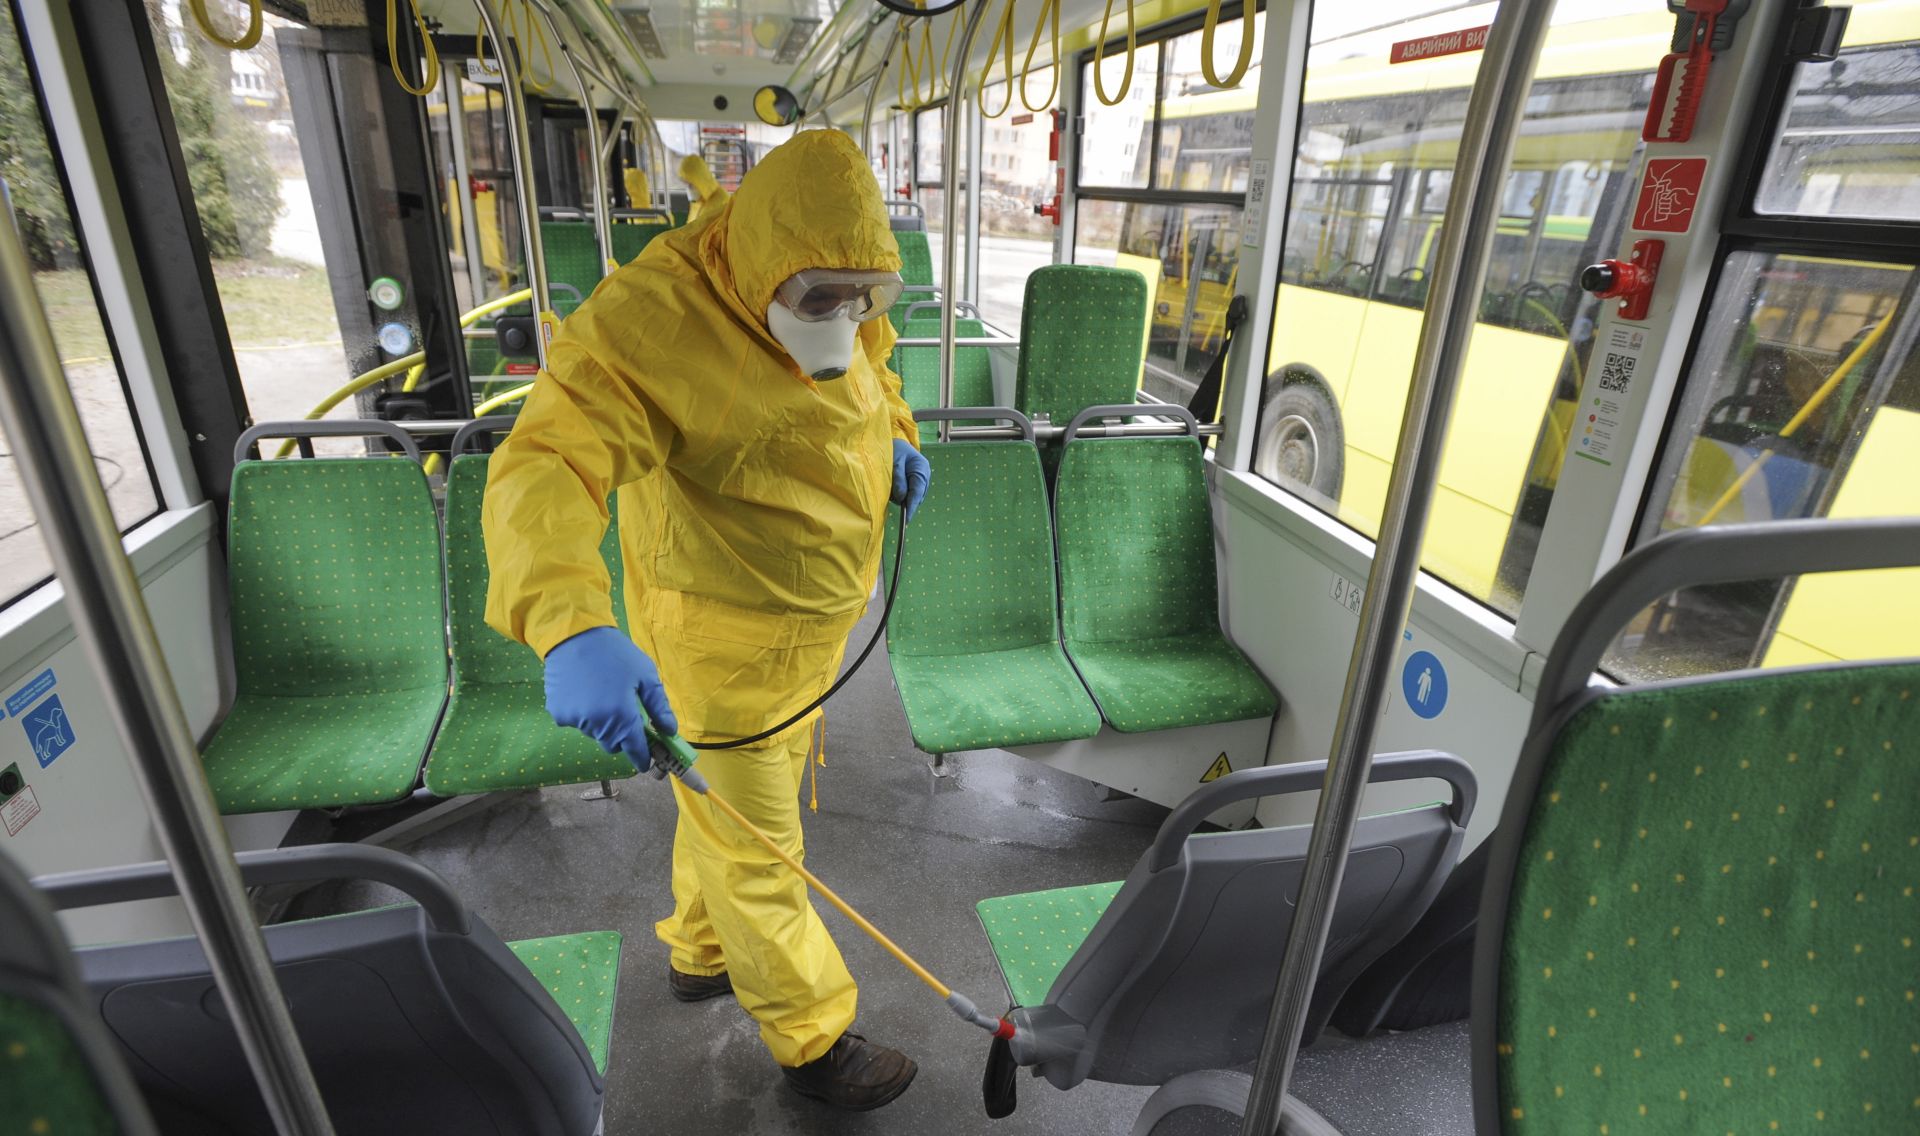 epa08266730 Workers disinfect a trolleybus after it arrived at a bus depot in the western city of Lviv, Ukraine, 03 March 2020. The first case of novel coronavirus Covid-19 has been confirmed in Ukraine, according to Deputy Minister of Health of Ukraine Viktor Liashko report.  EPA/MYKOLA TYS